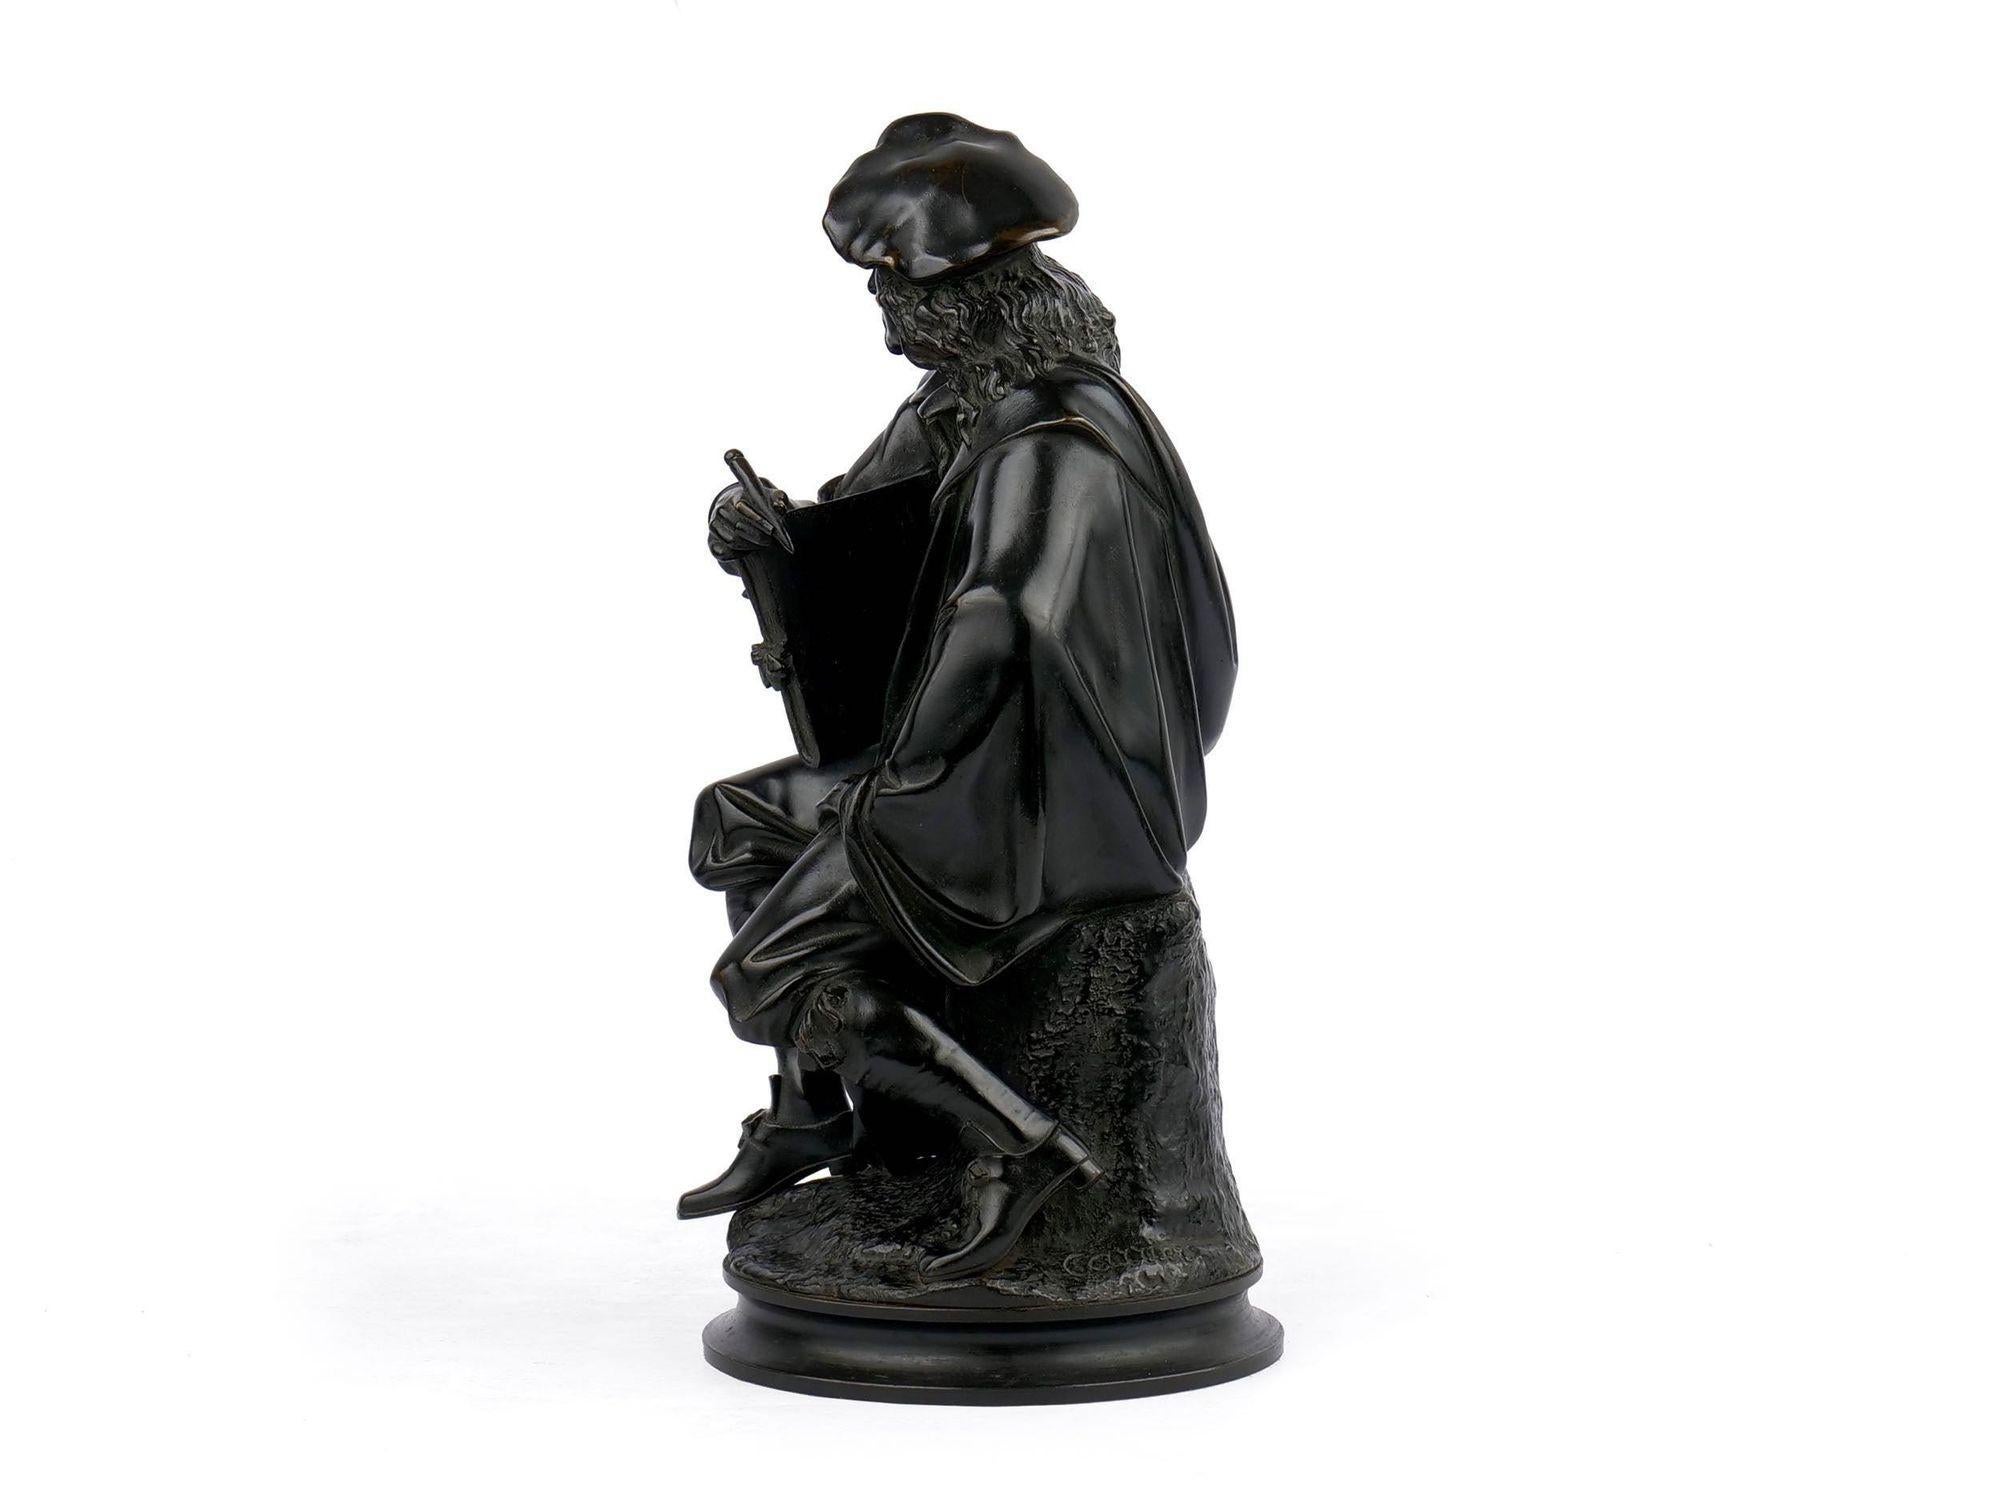 BRONZE FIGURE OF “REMBRANDT” AFTER MODEL BY ALBERT CARRIER-BELLEUSE
Circa last quarter of 19th century, in patinated bronze, signed 